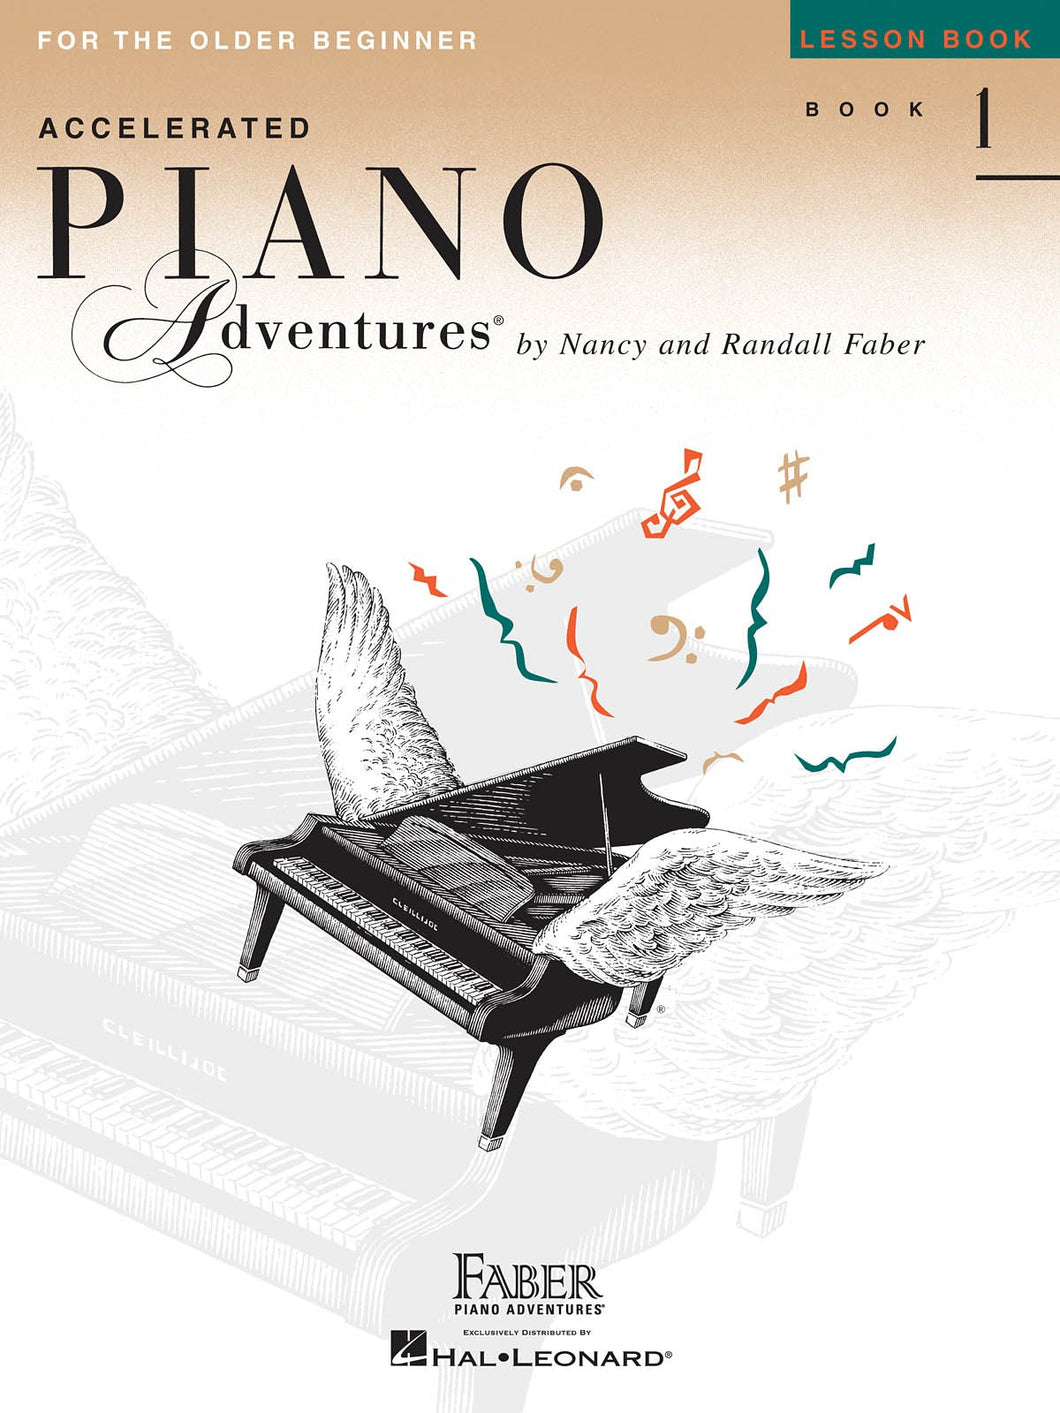 Faber Accelerated Piano Adventures Book 1 Lesson